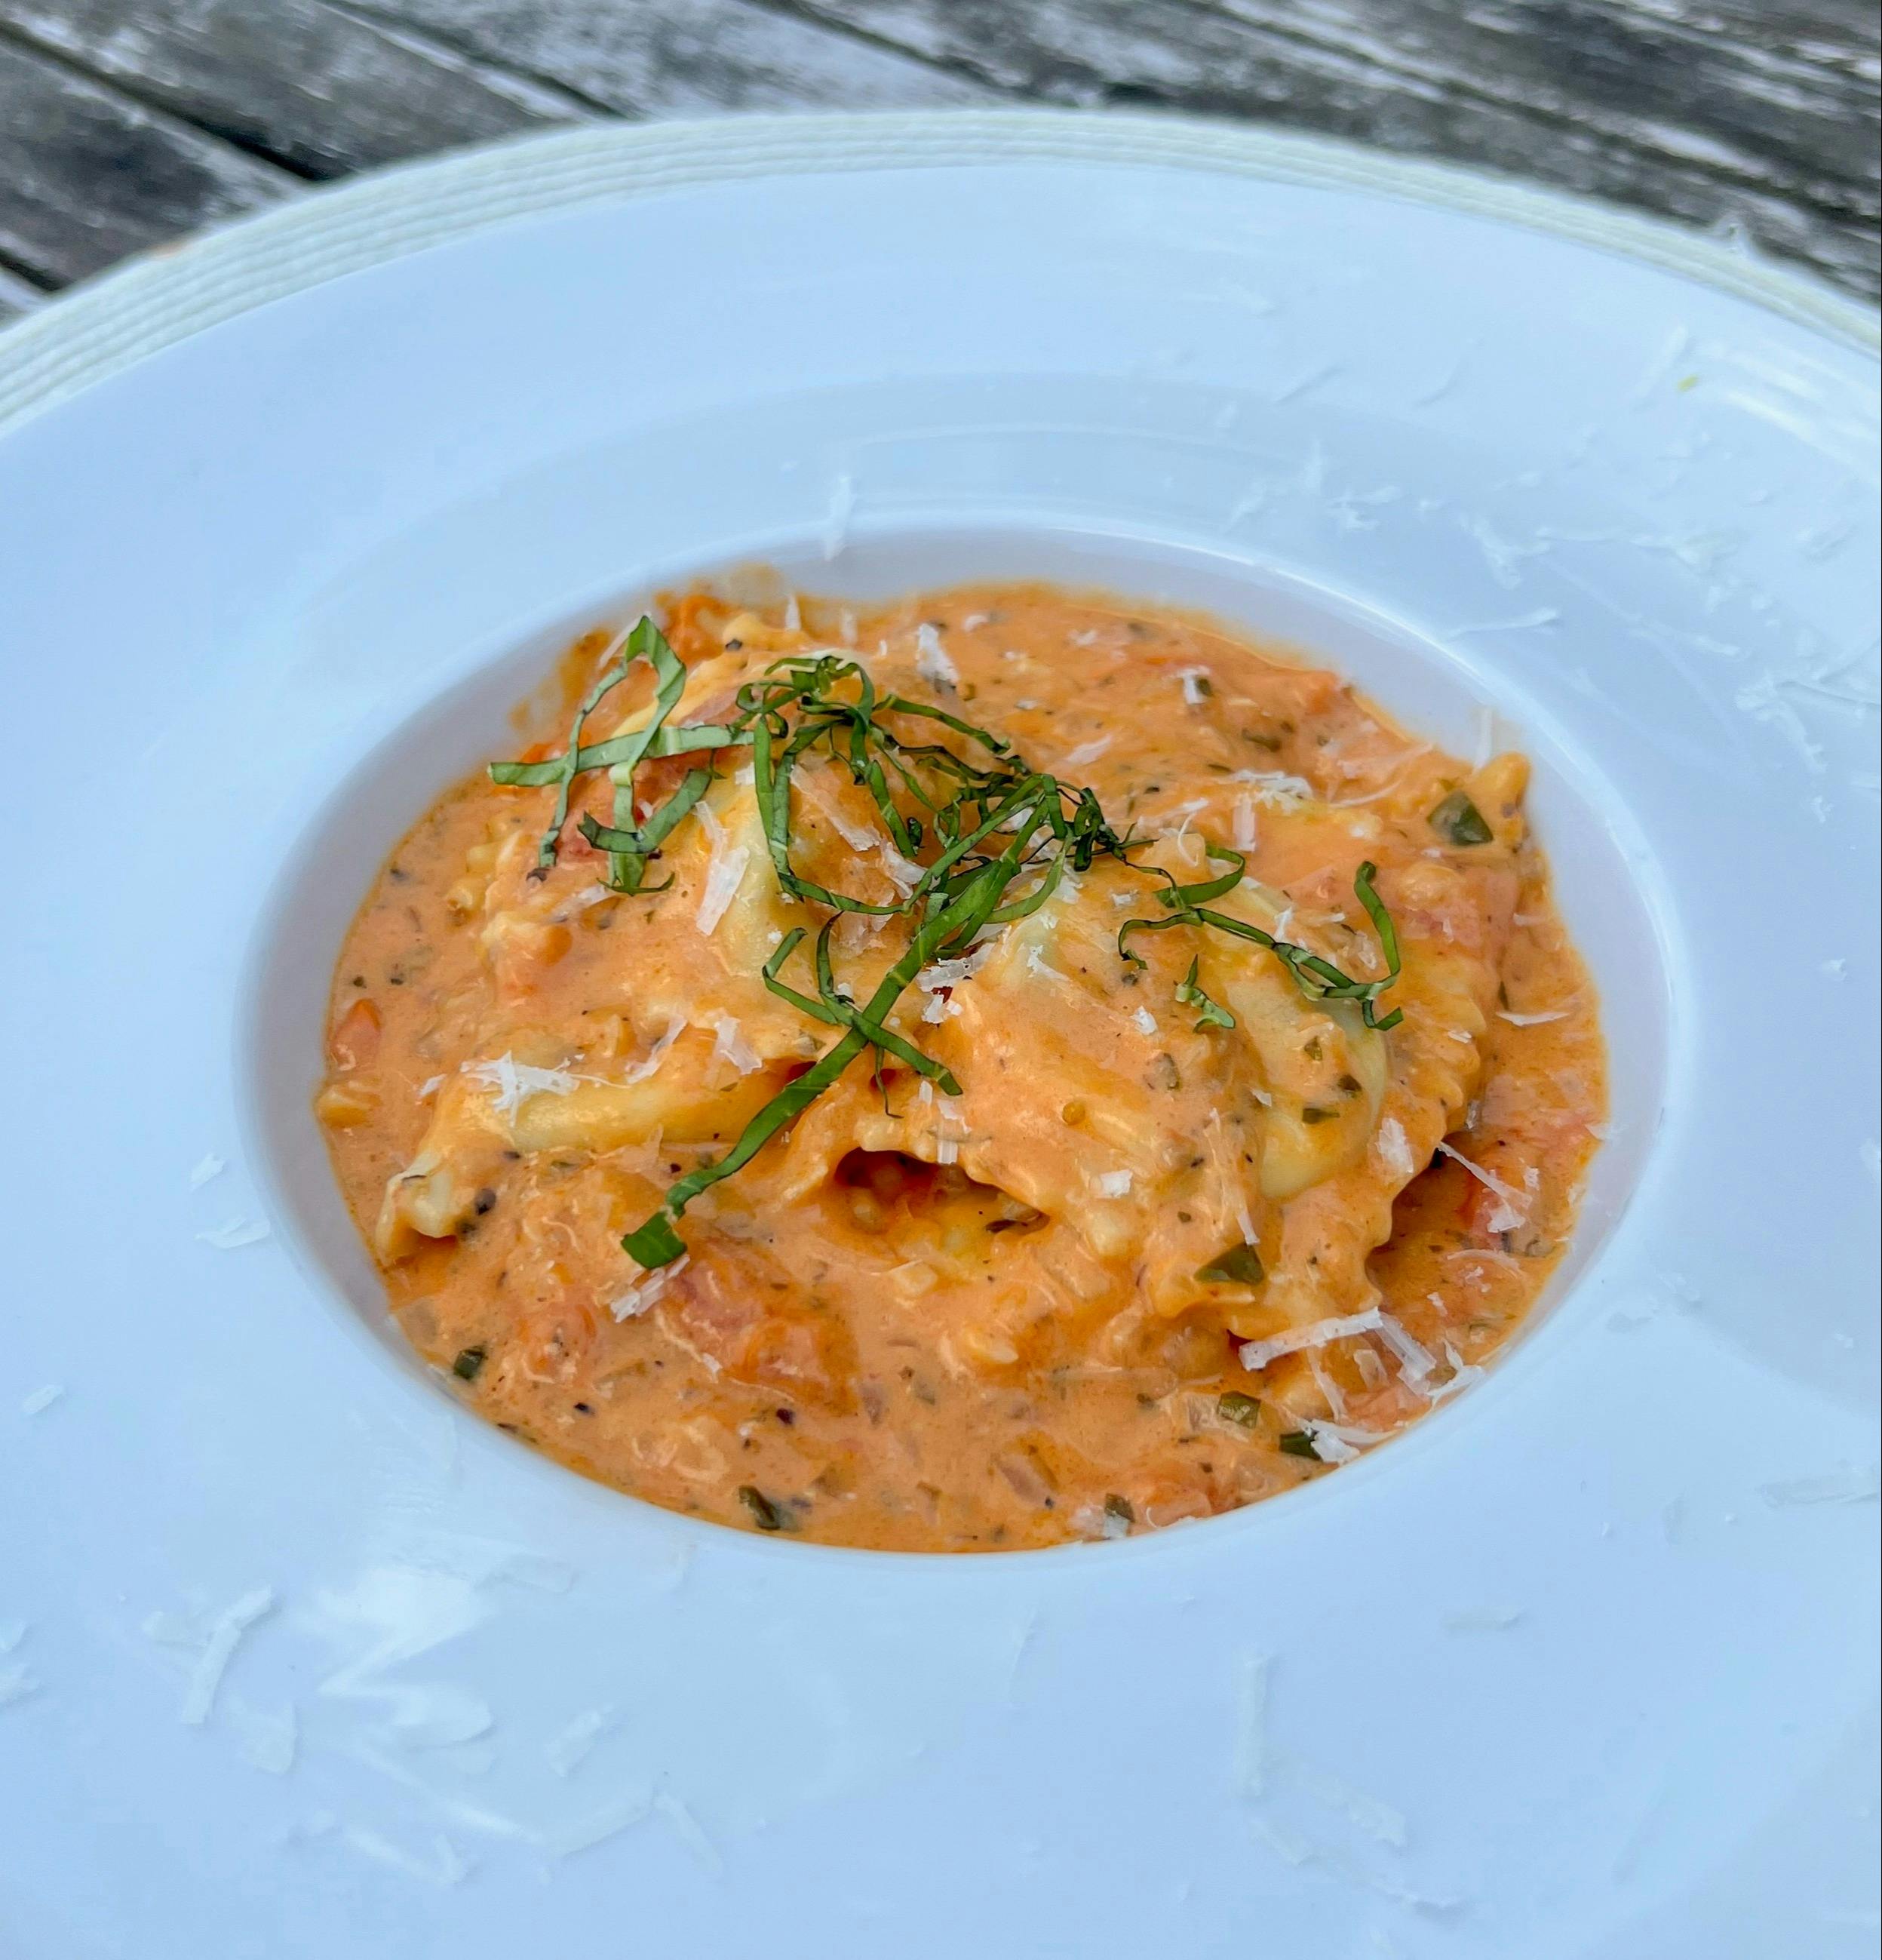 Picture for Ravioli with Pink Sauce